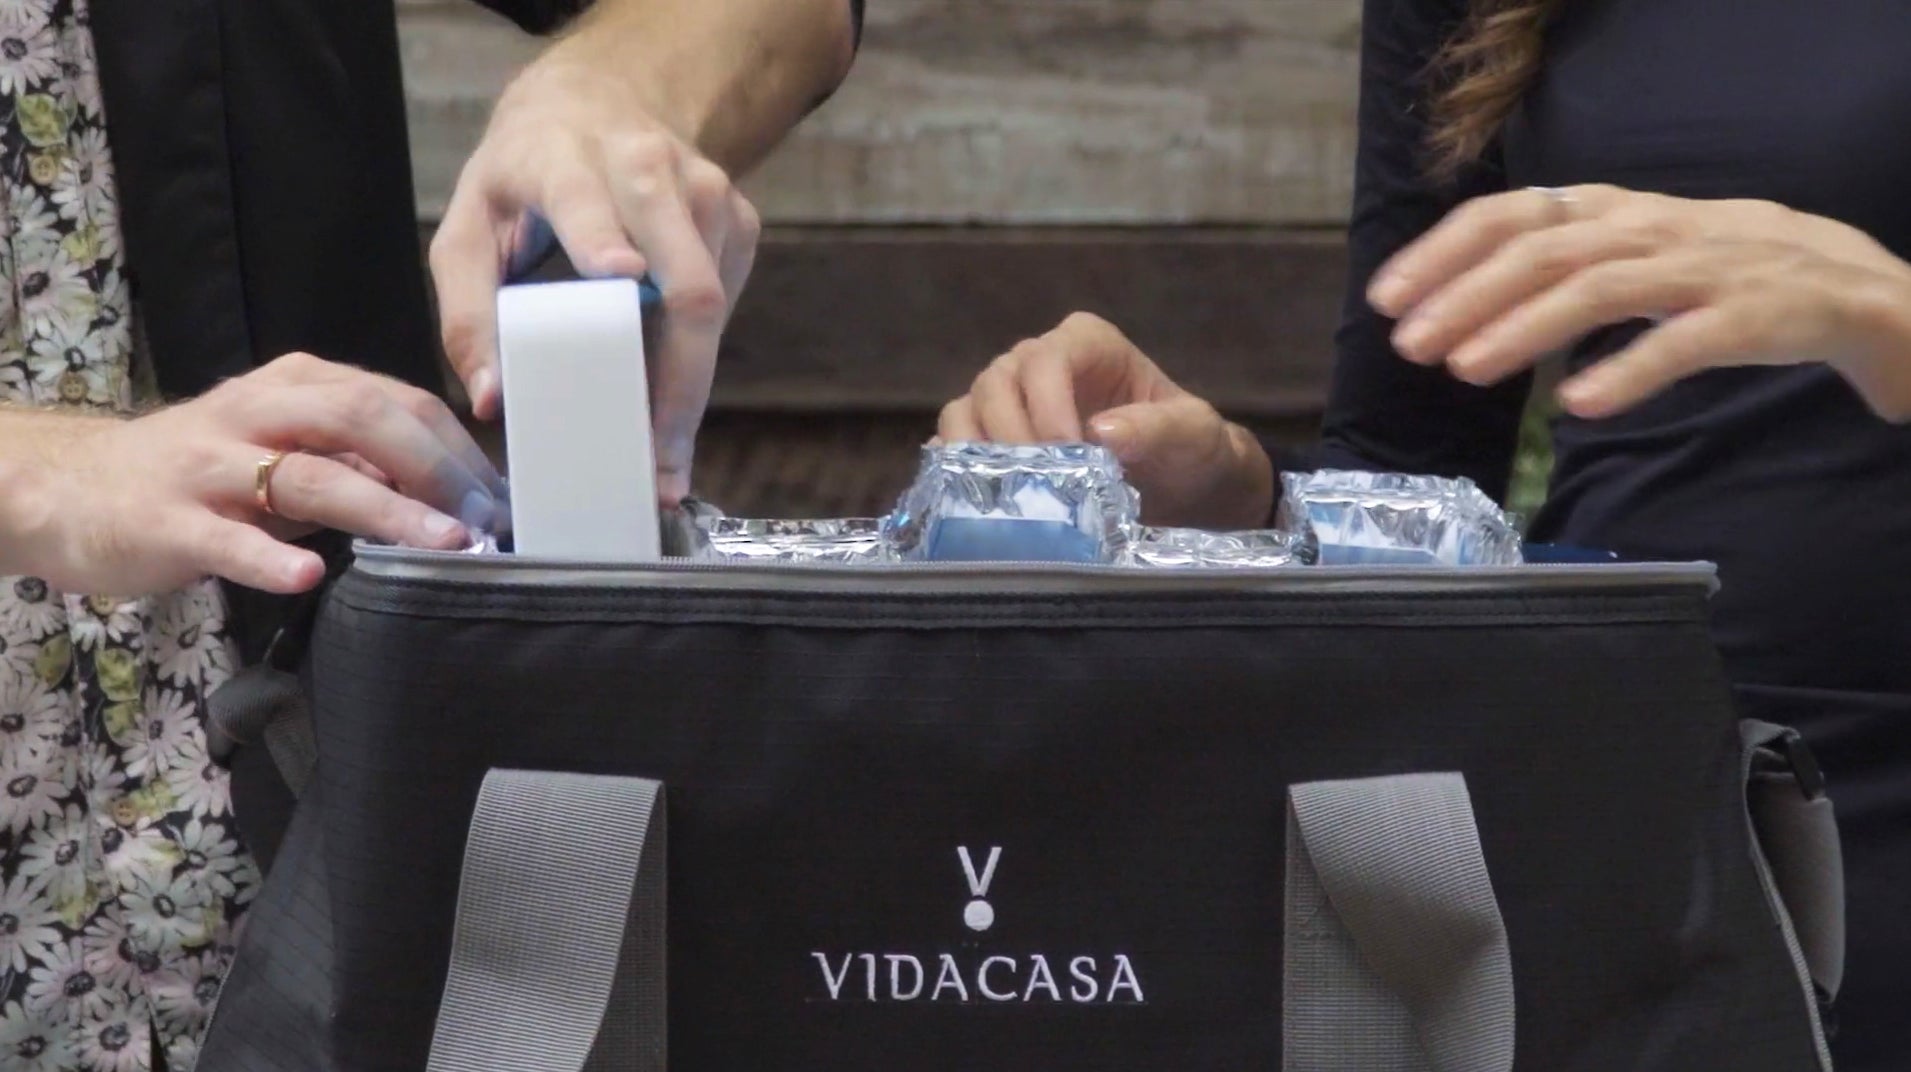 Load video: use elements carrier to store and carry vidacasa c1 freeze pack cold cells for offsite locations